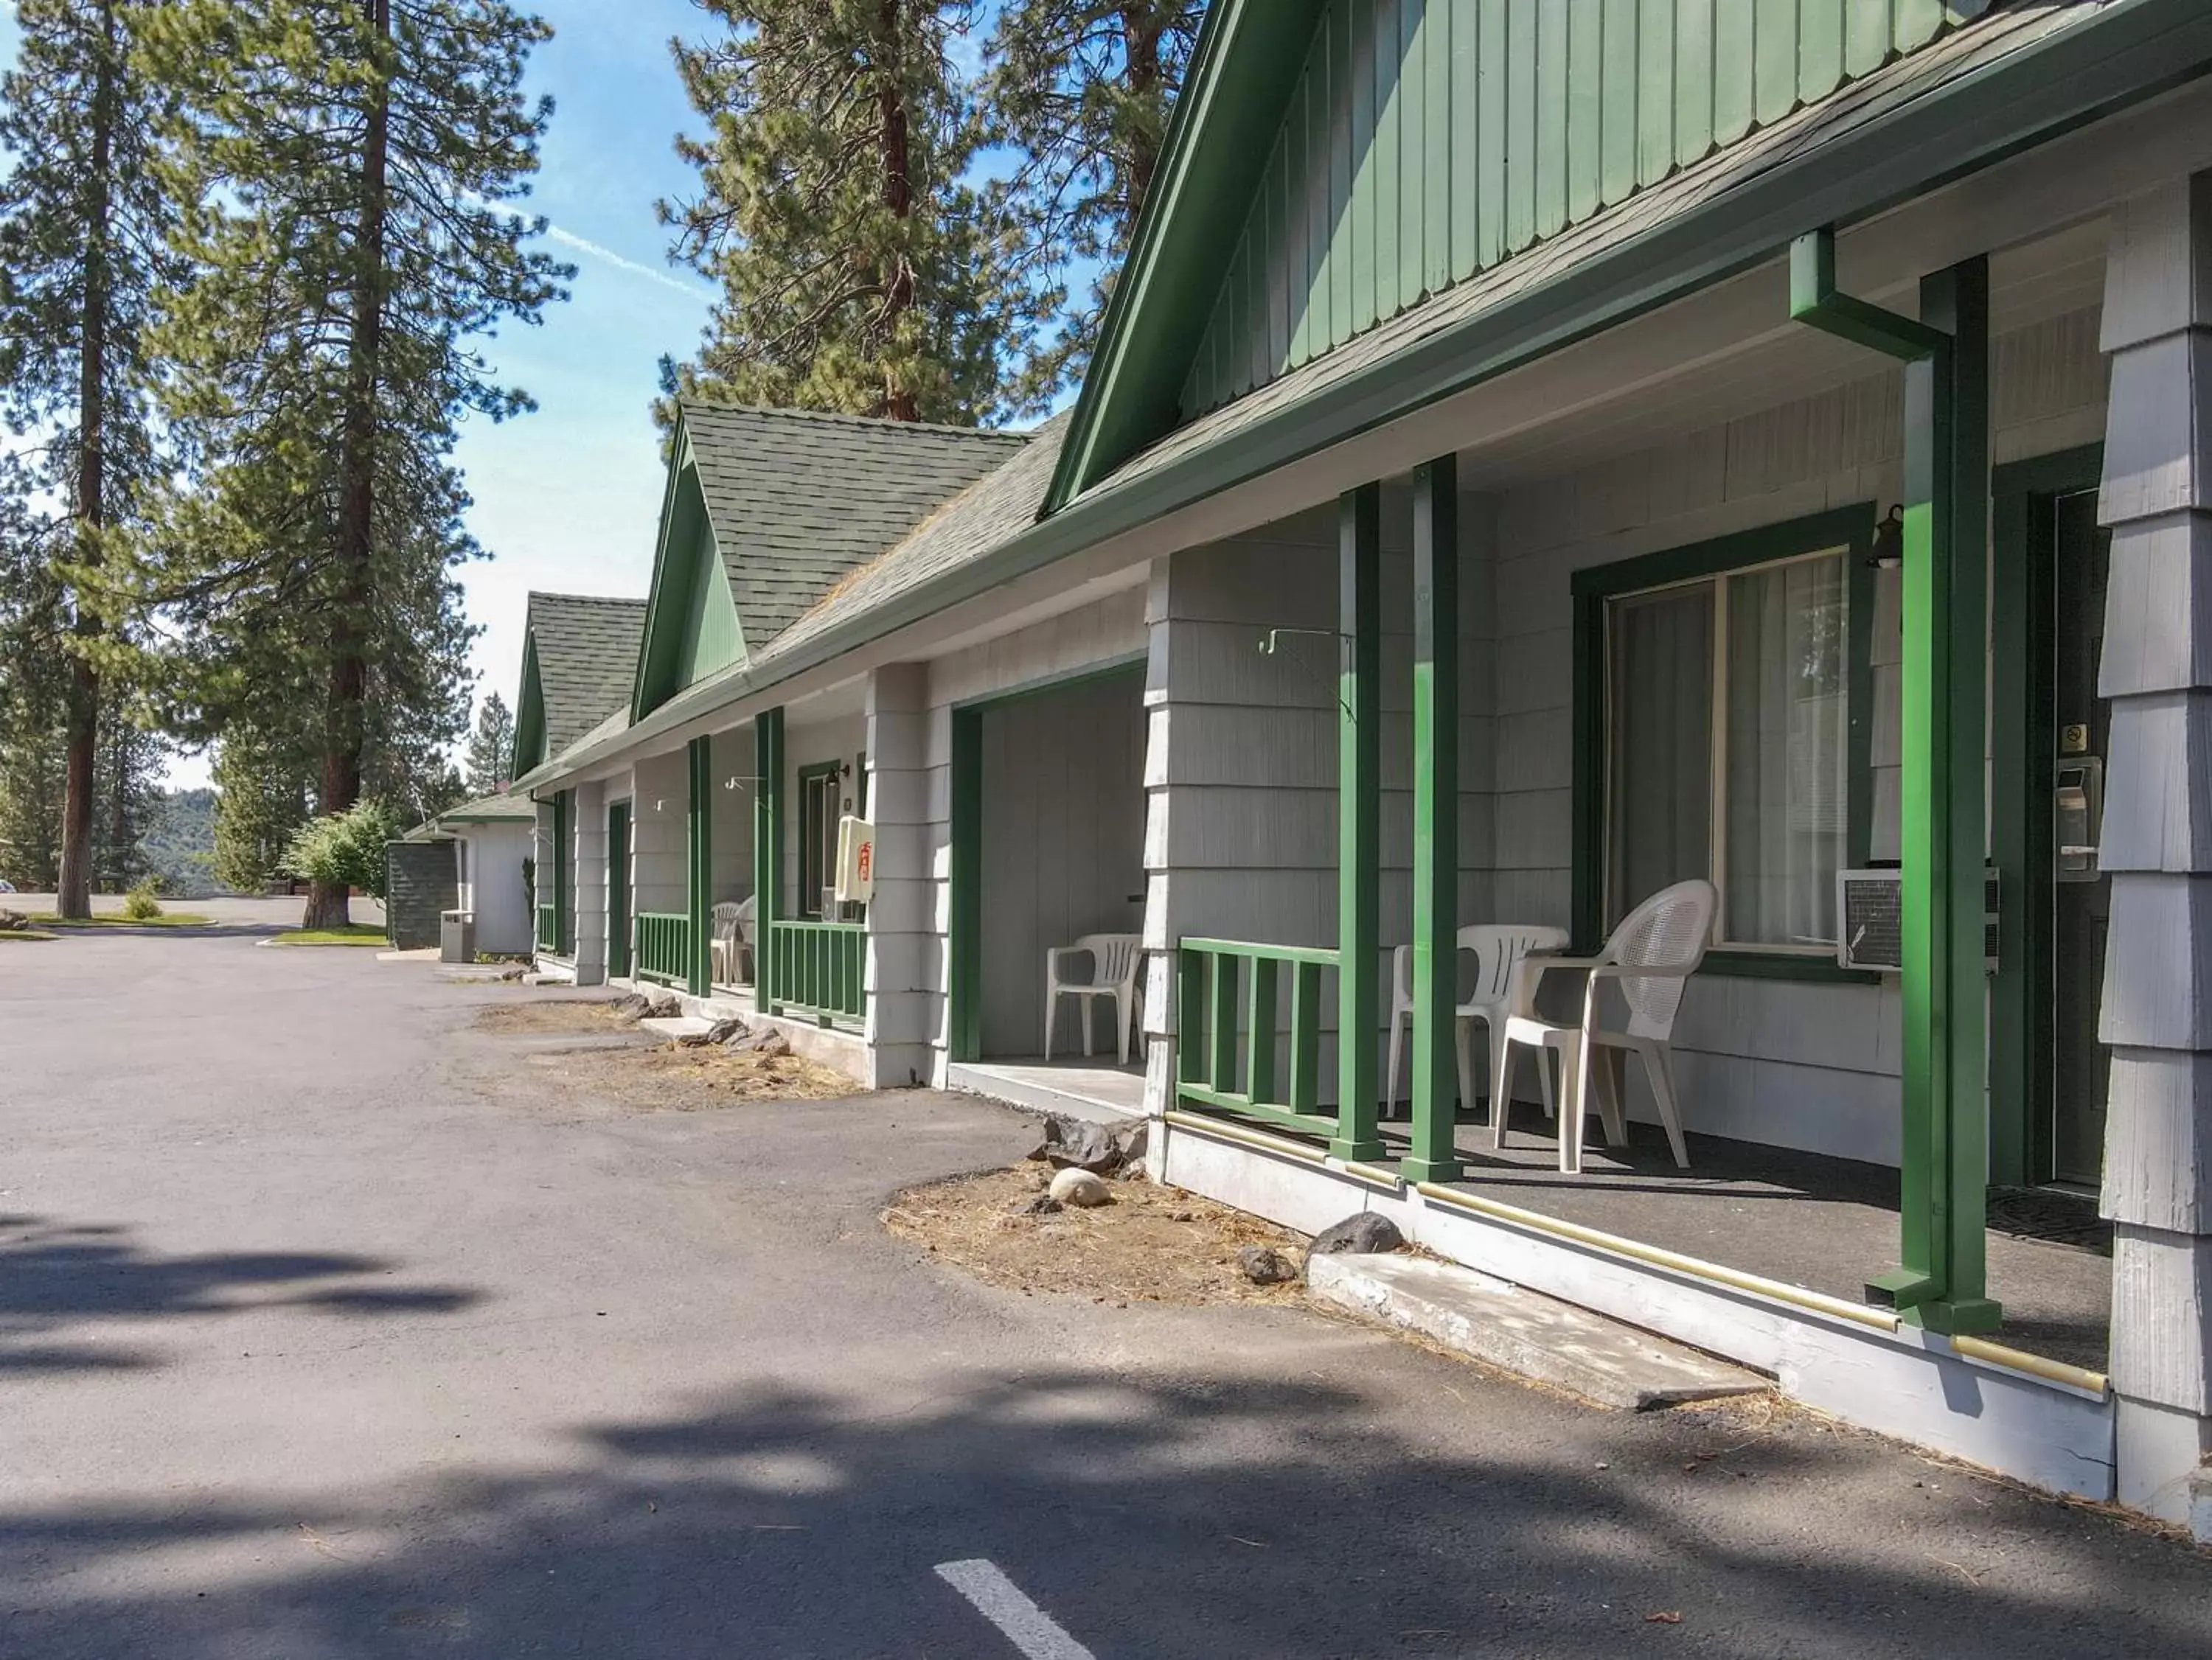 Property building in Green Gables Motel & Suites